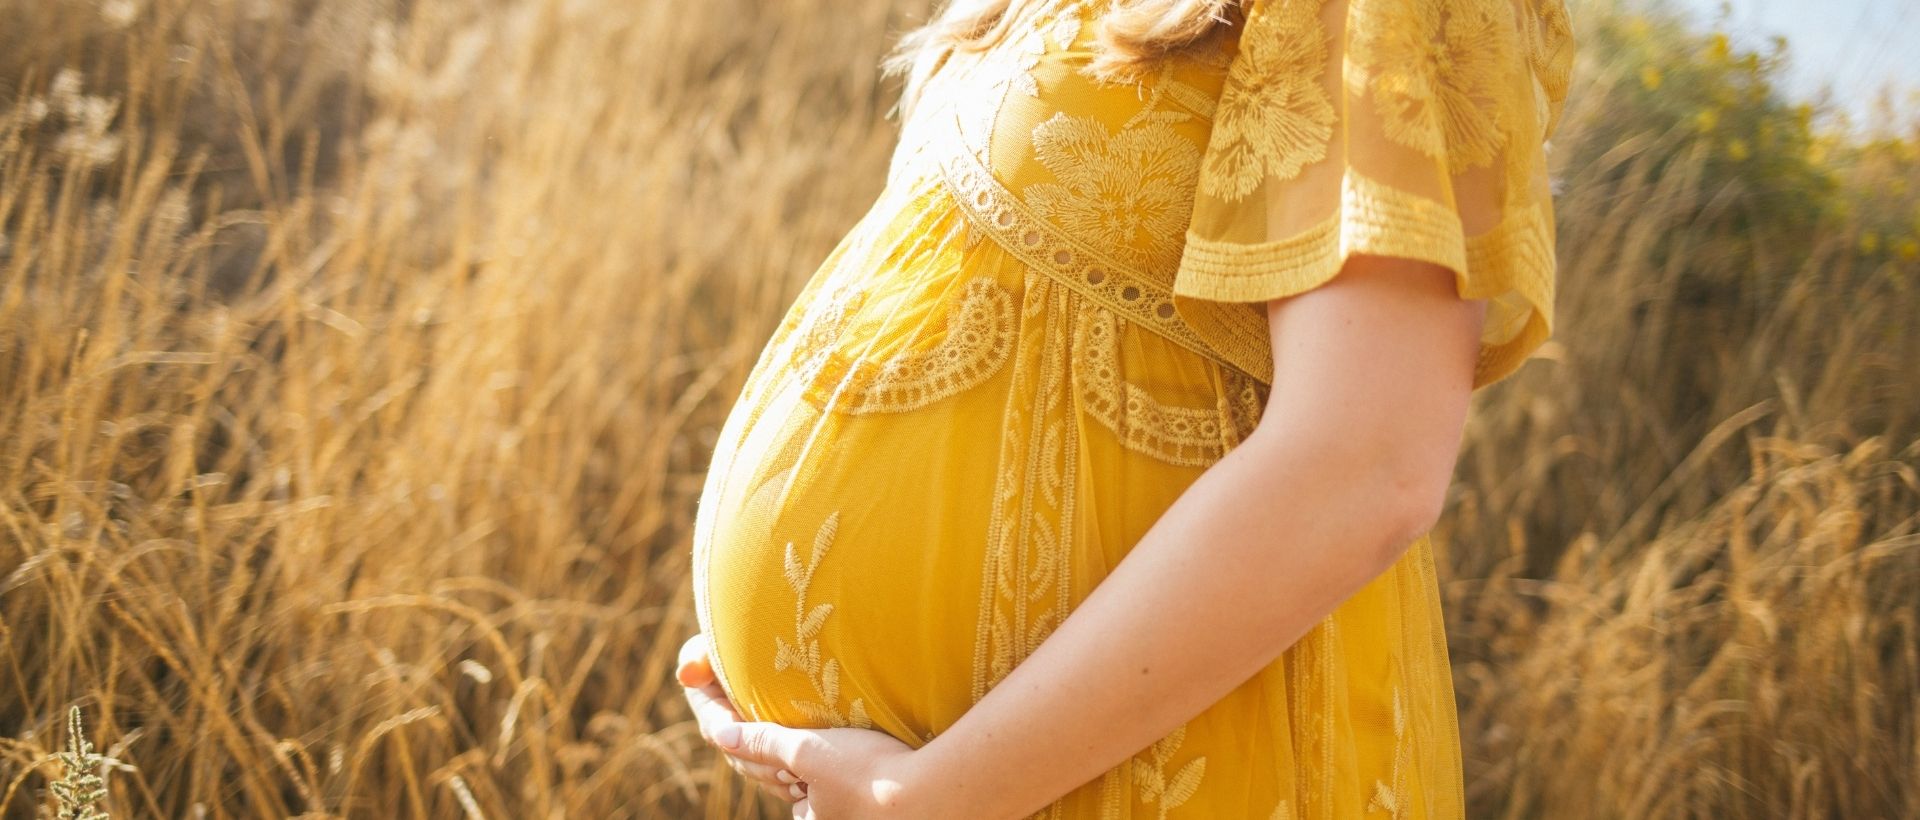 a pregnant woman in a yellow dress standing in a field.